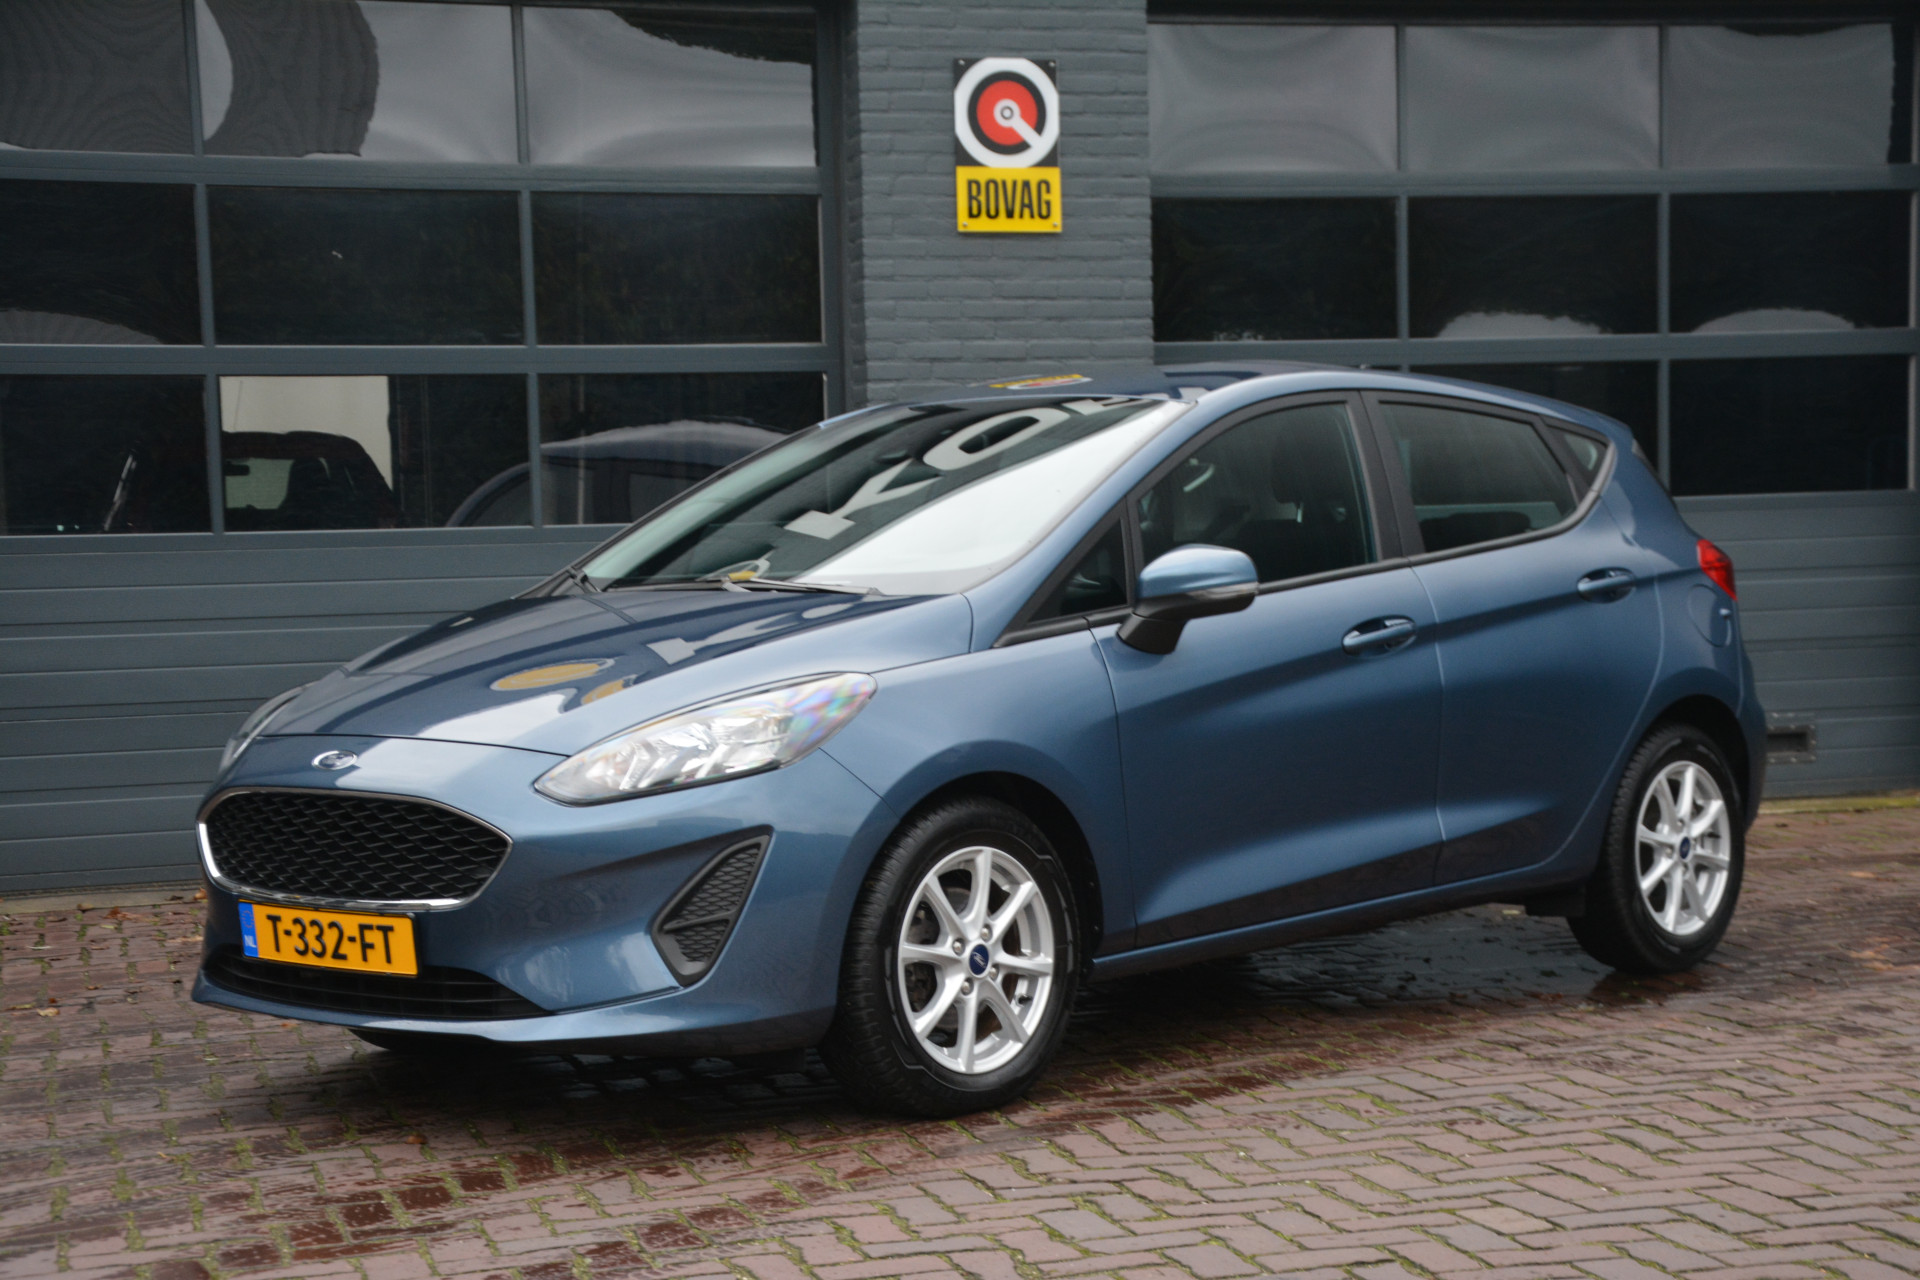 Ford Fiesta 1.0 EcoBoost Hybrid Connected Automaat bij viaBOVAG.nl